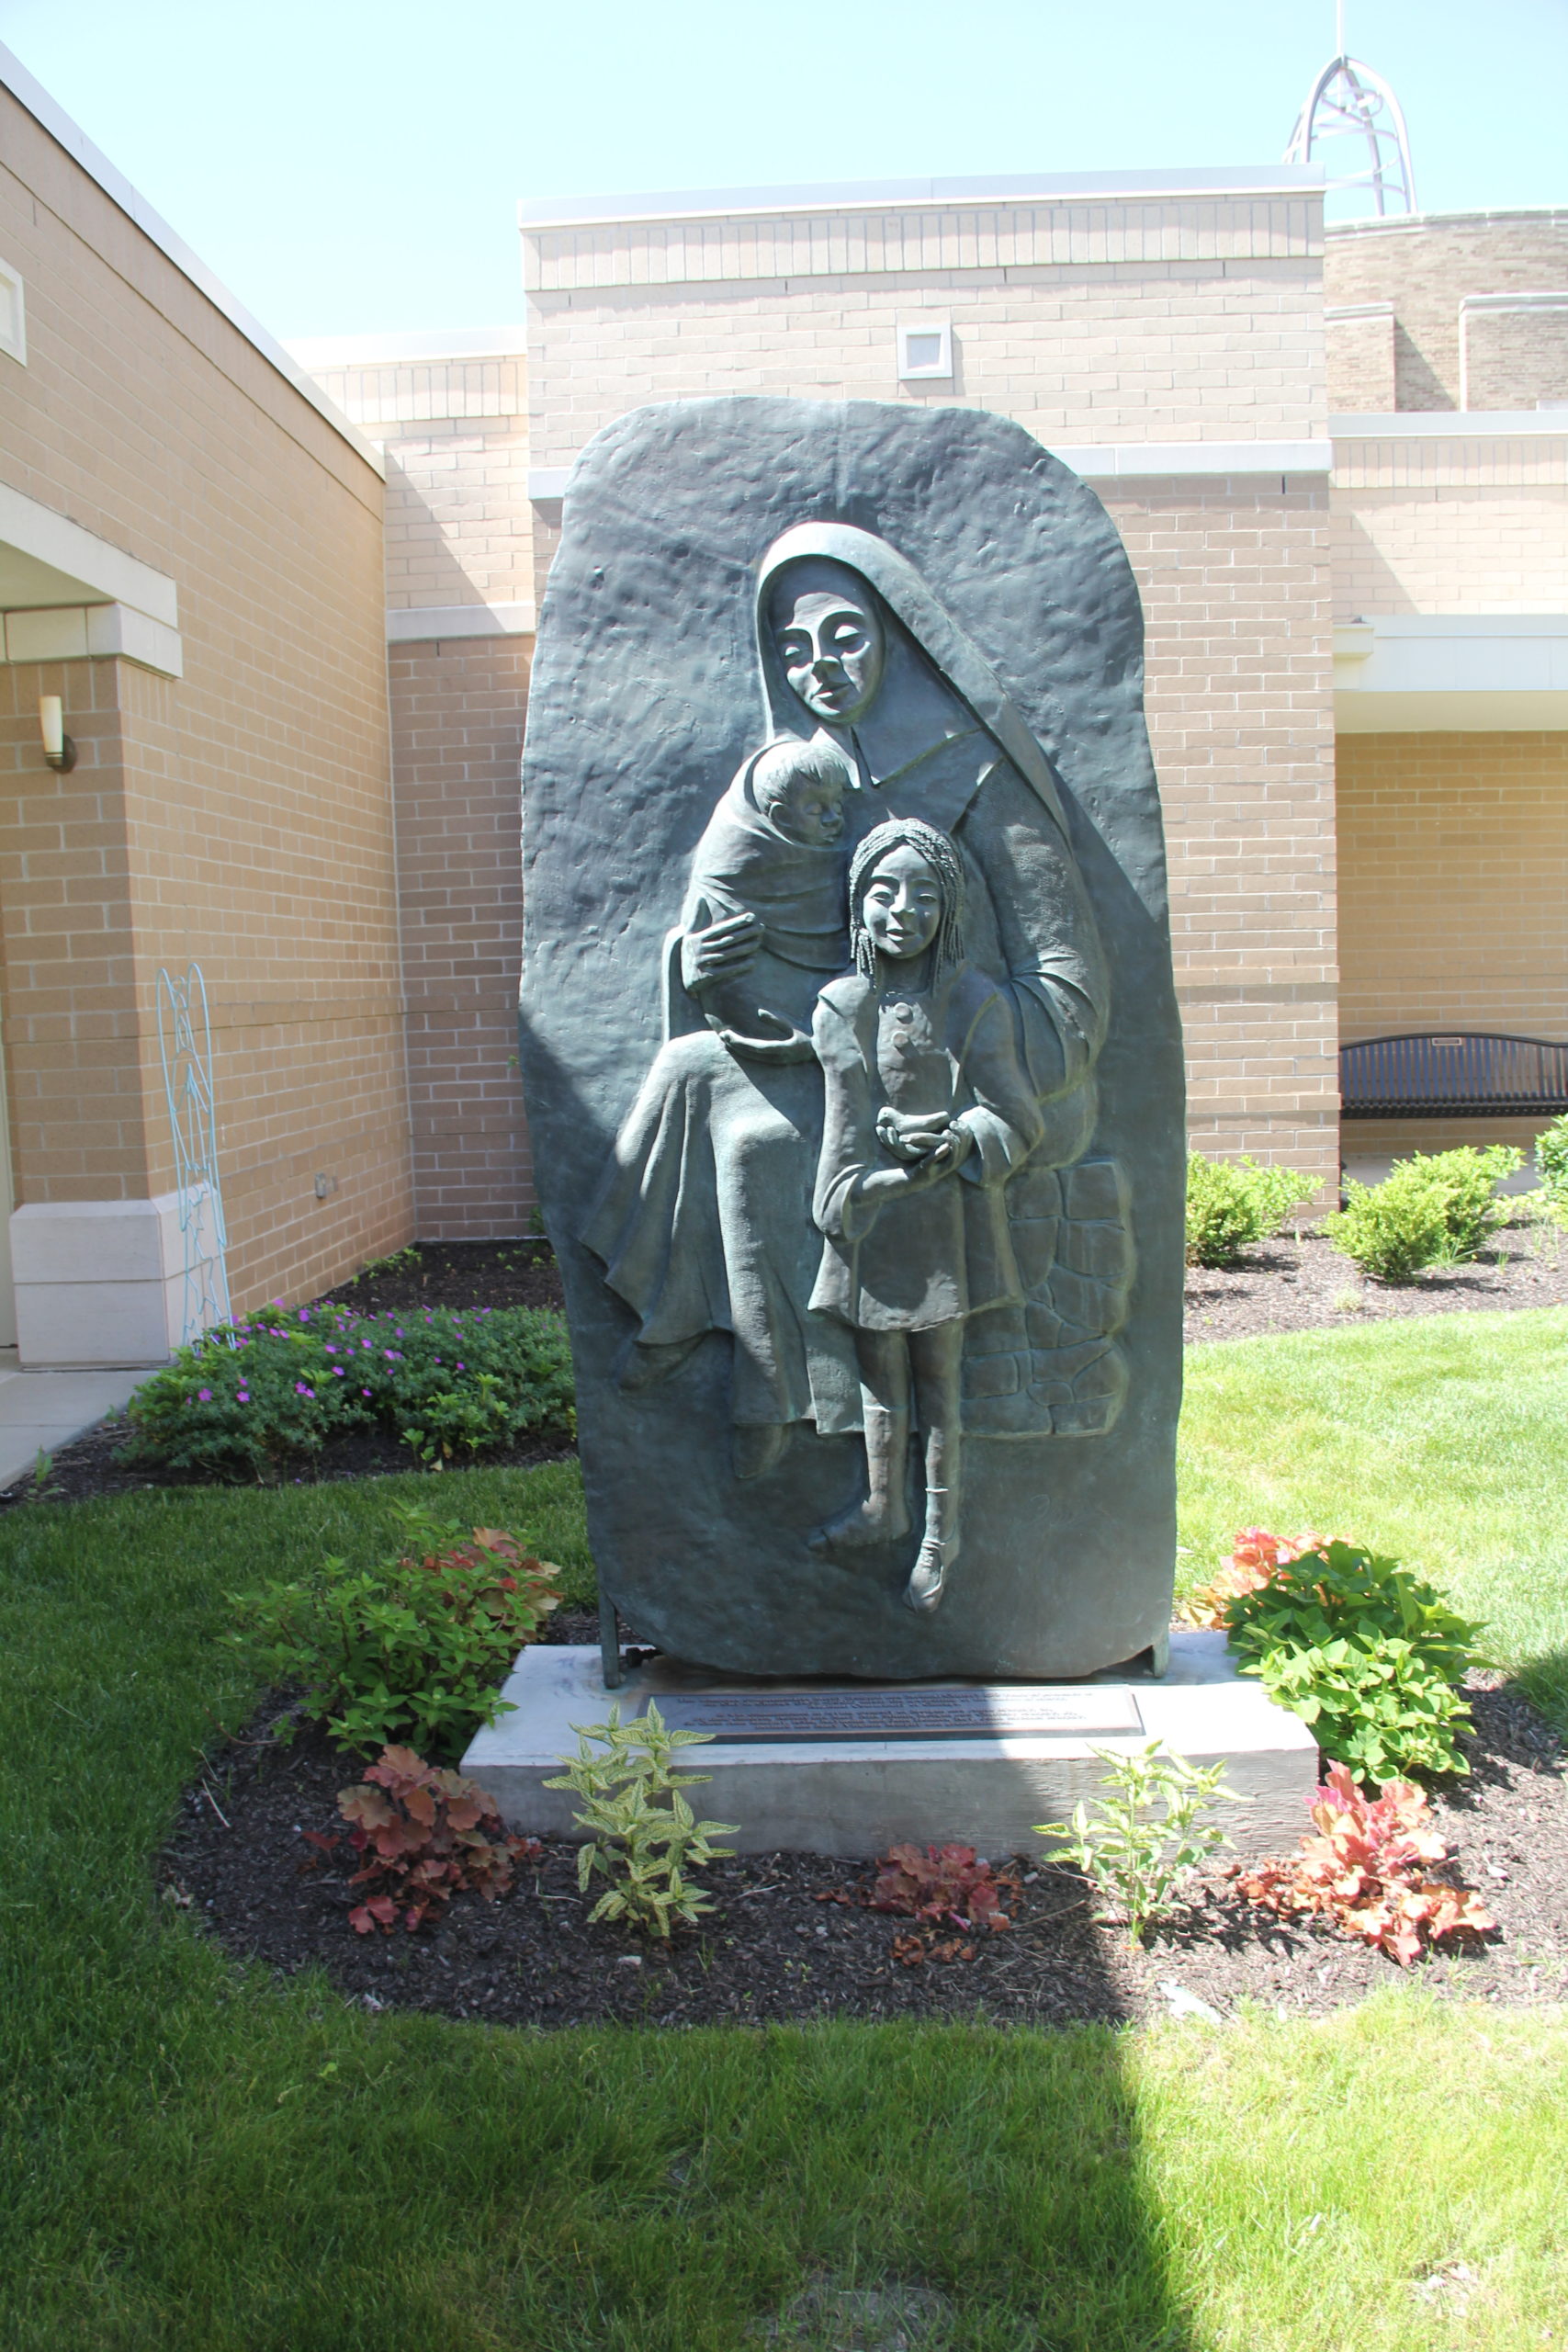 Artwork Finds New Home at Mercy Circle